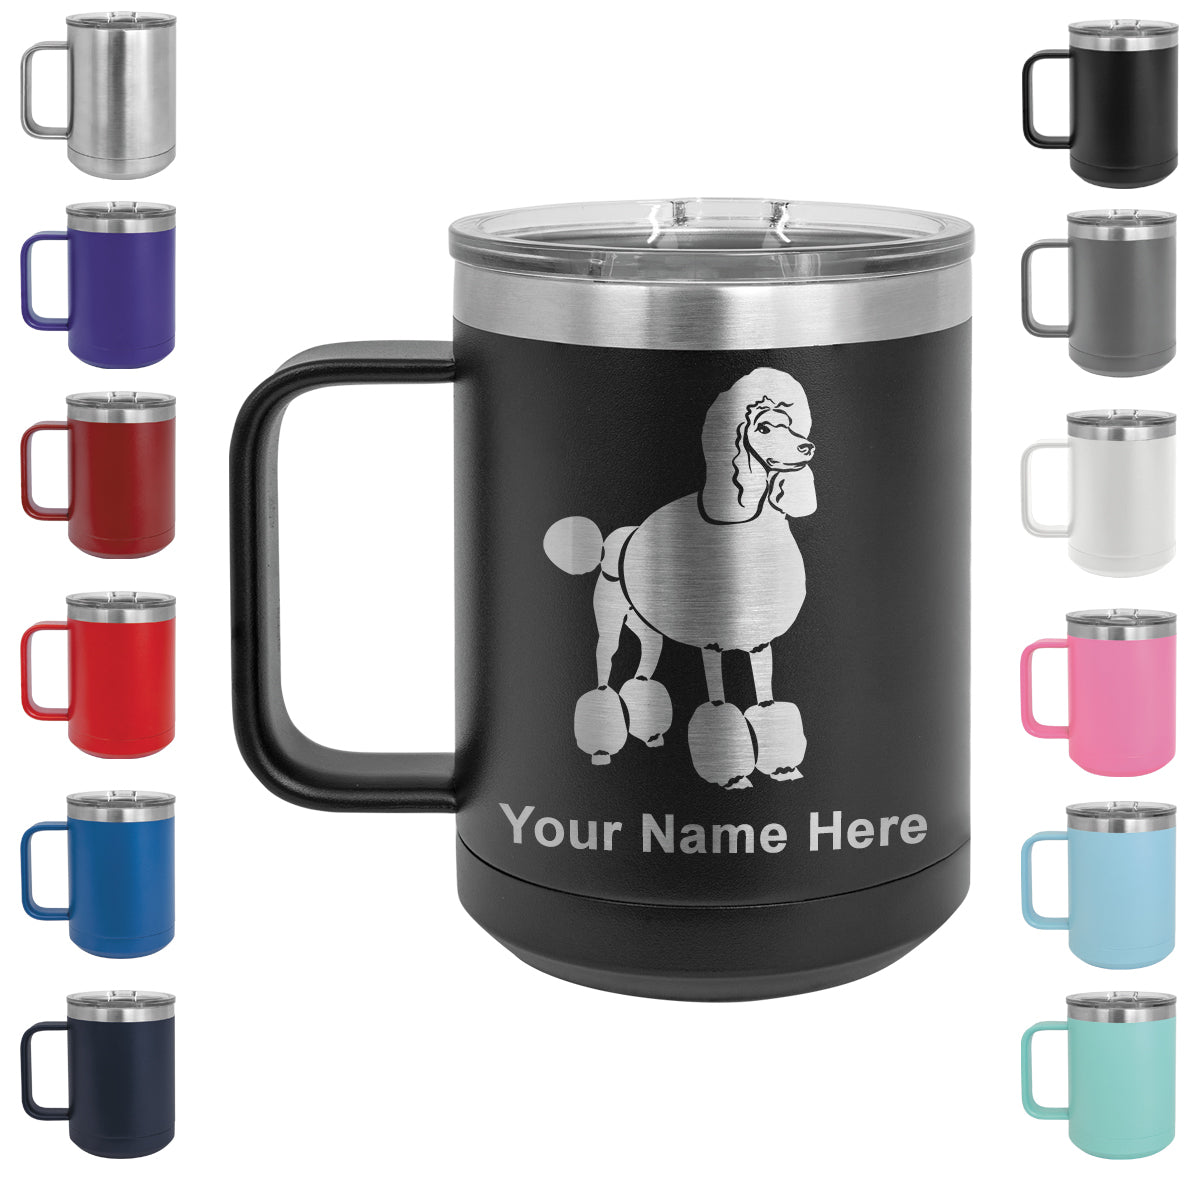 15oz Vacuum Insulated Coffee Mug, French Poodle Dog, Personalized Engraving Included